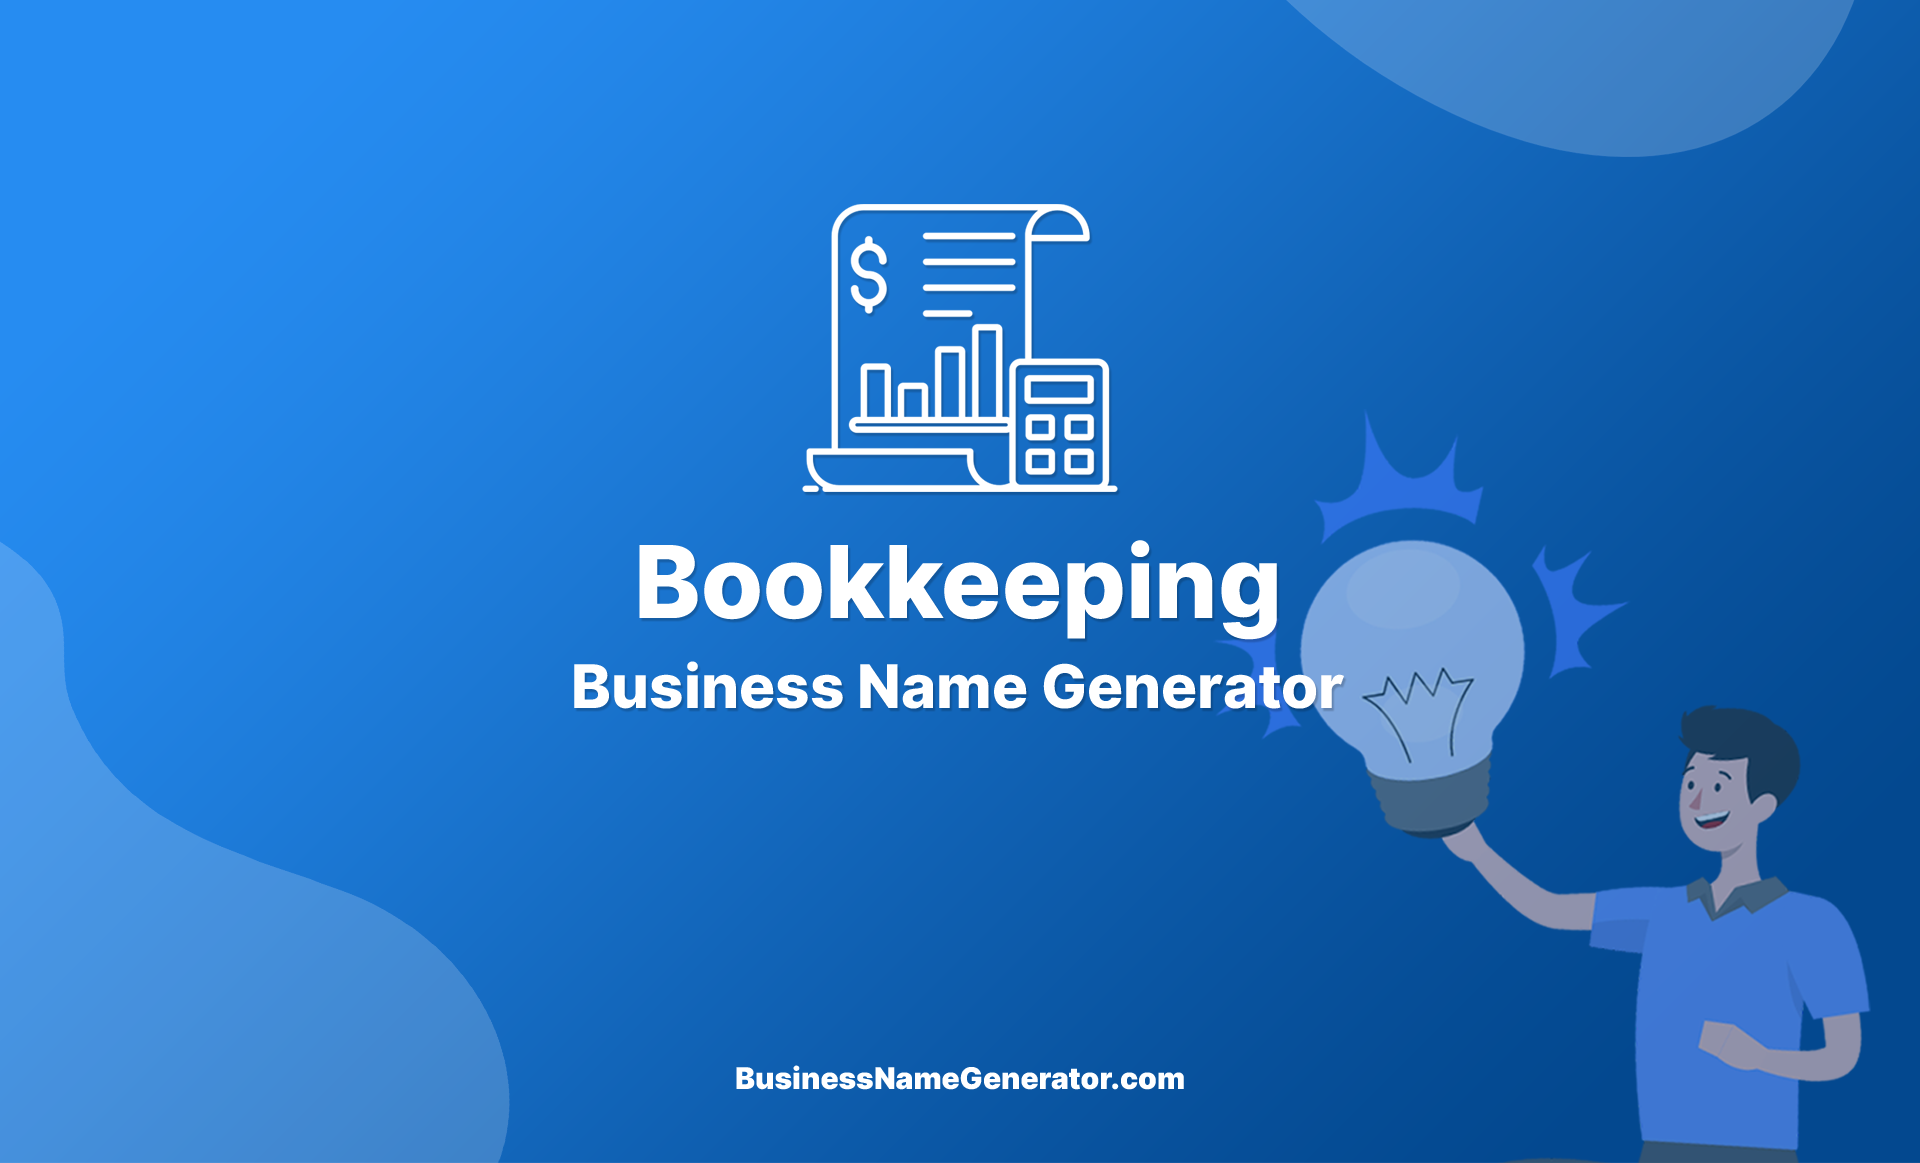 Bookkeeping Business Name Generator Guide & Ideas